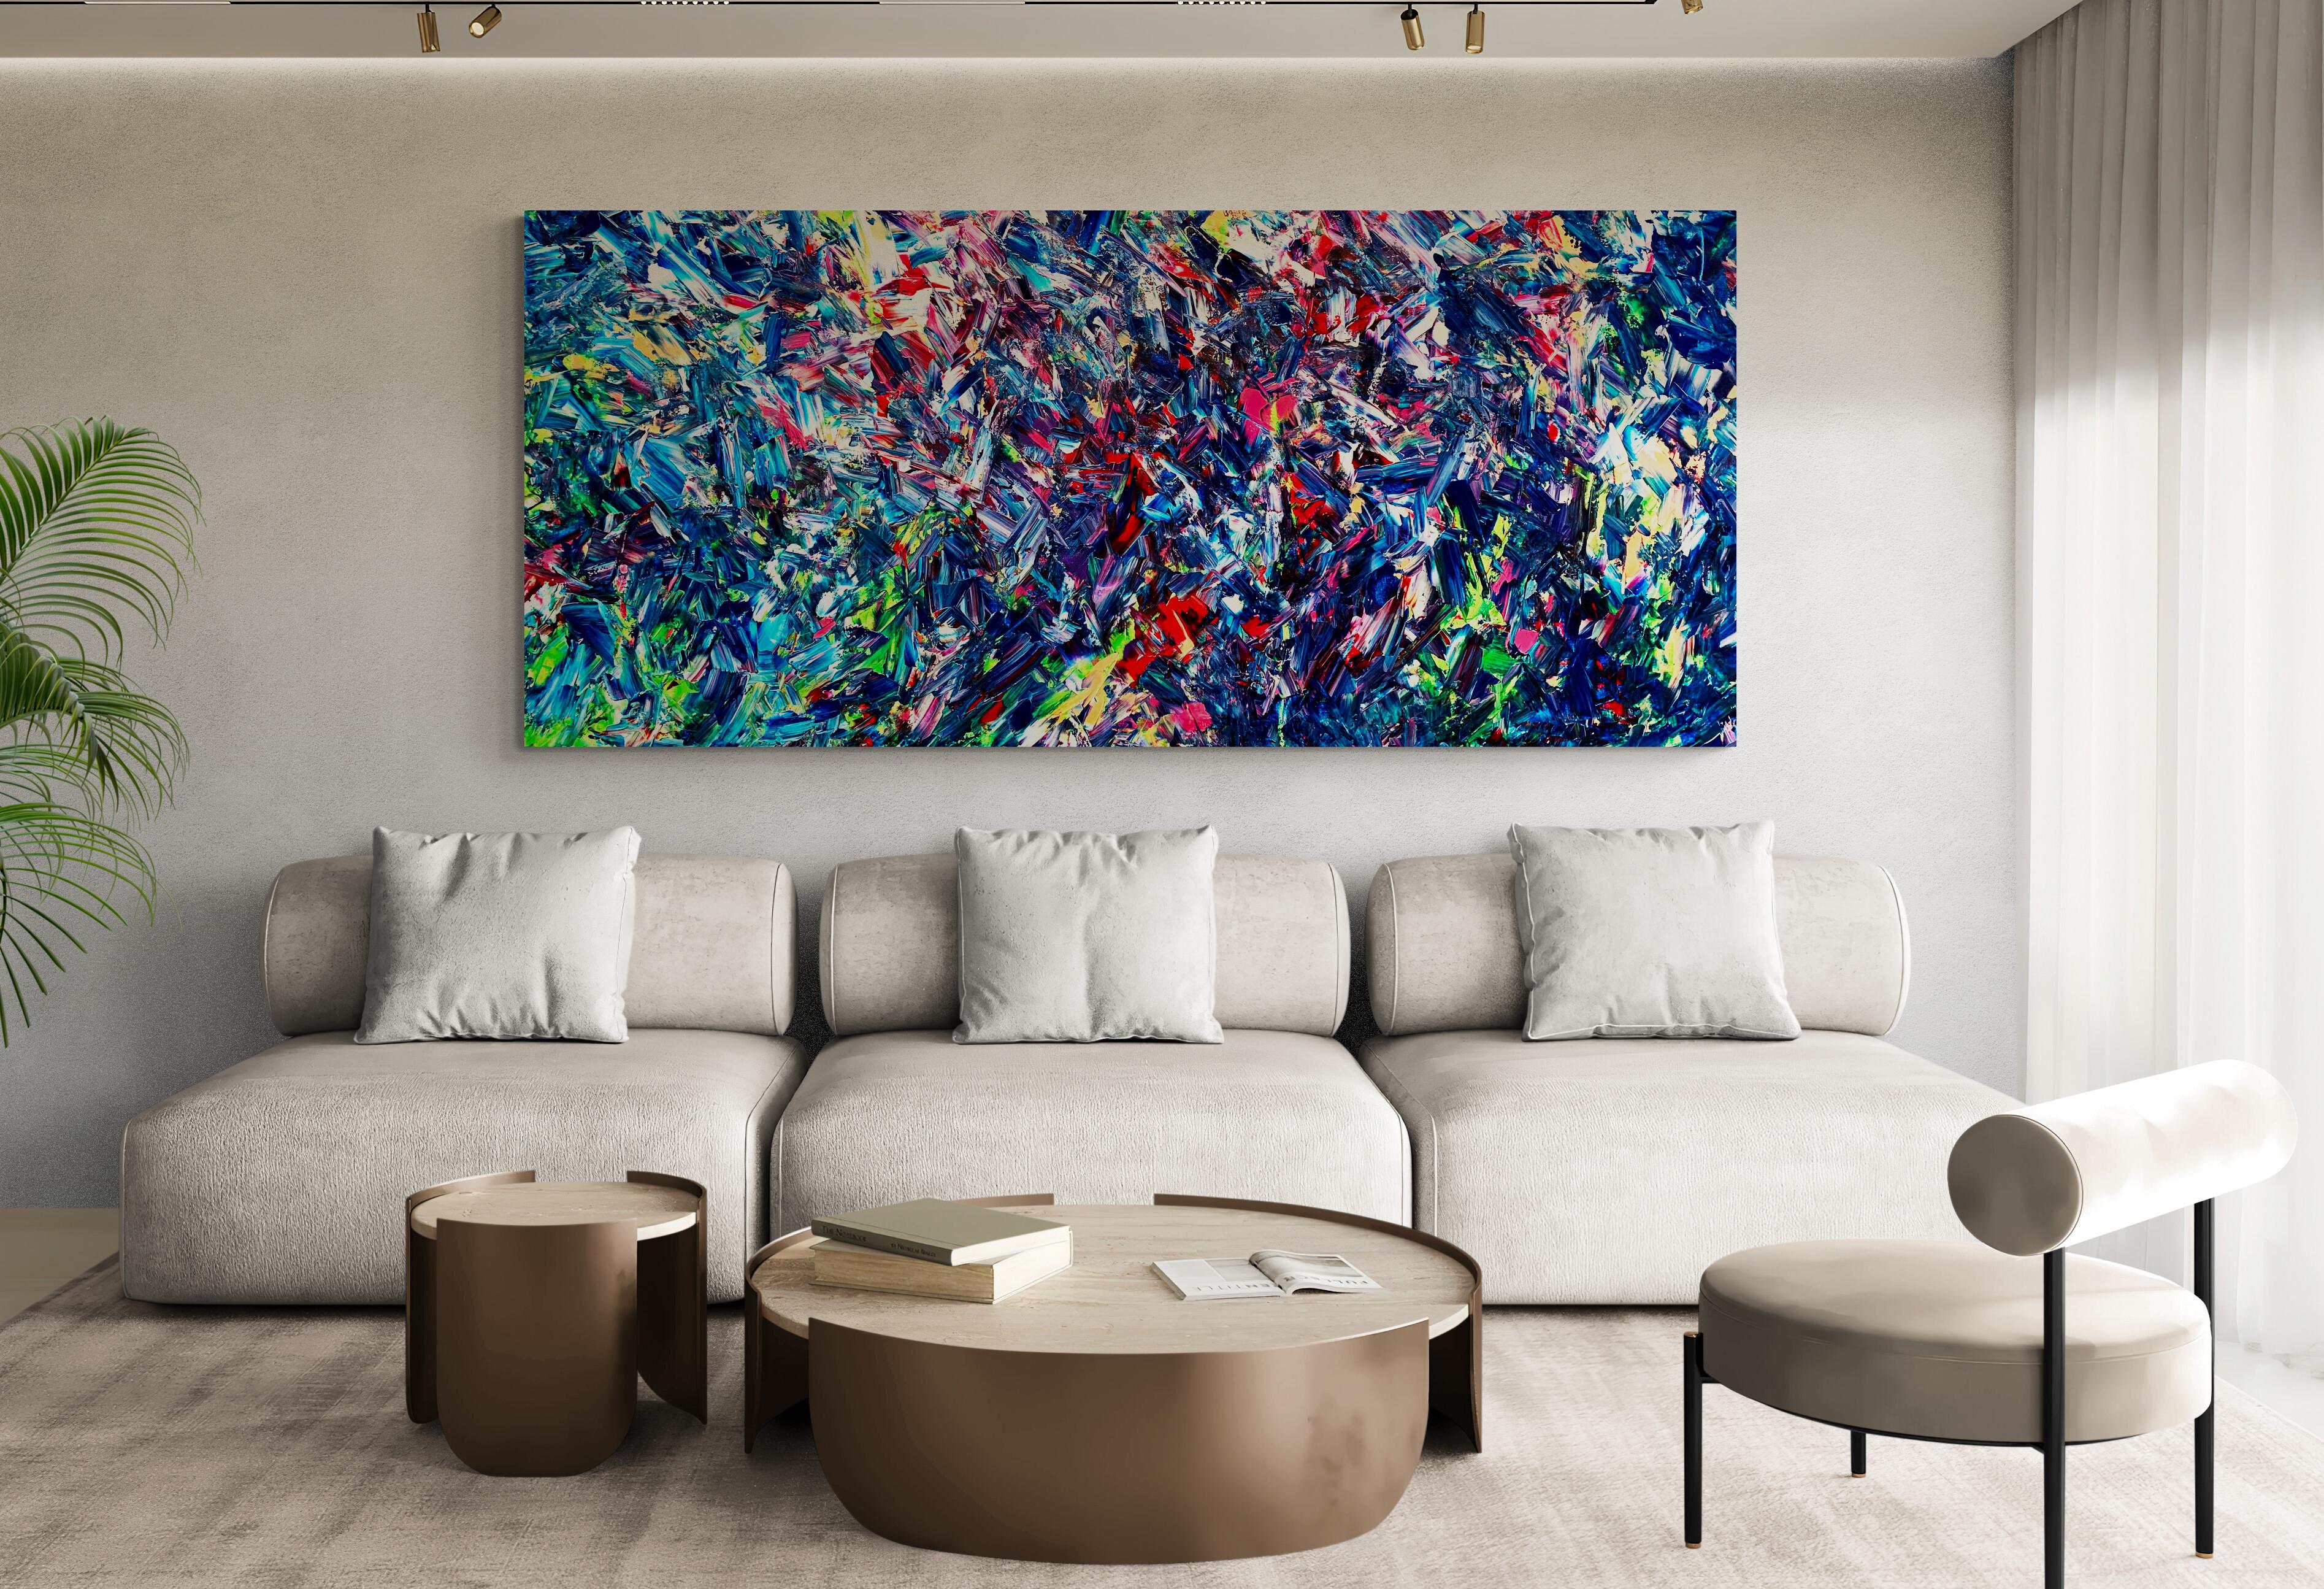 Colour Haven - Abstract Expressionist Painting by Estelle Asmodelle